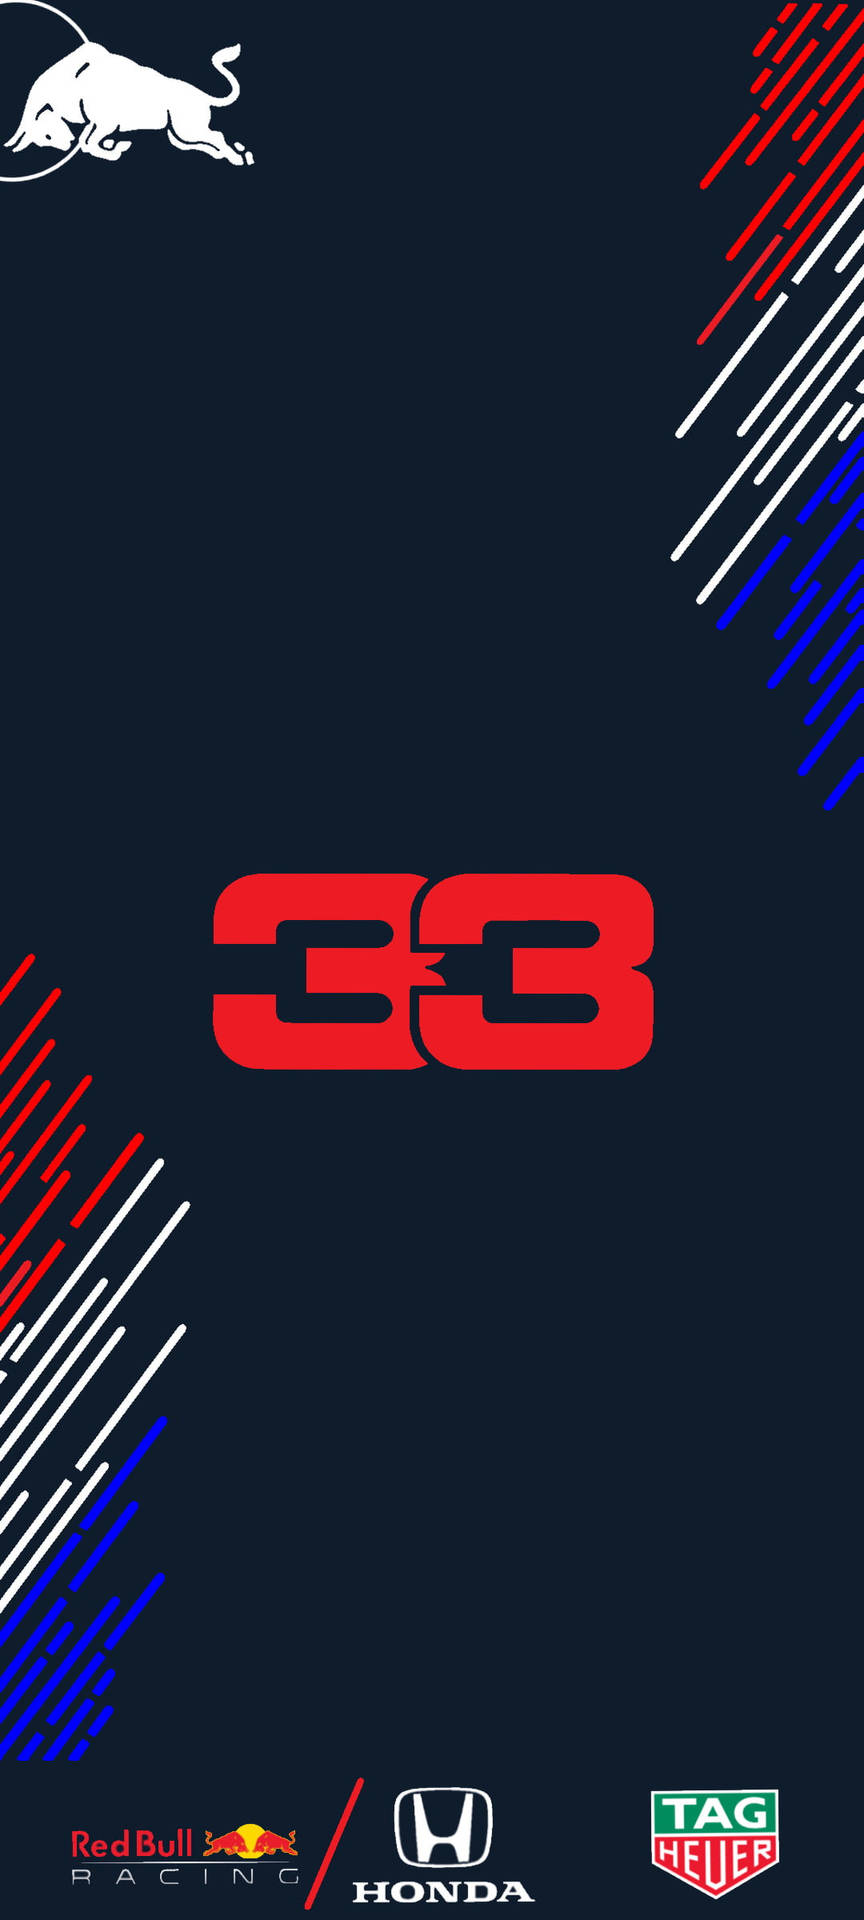 F1 Max Verstappen 33 Number Iphone Background